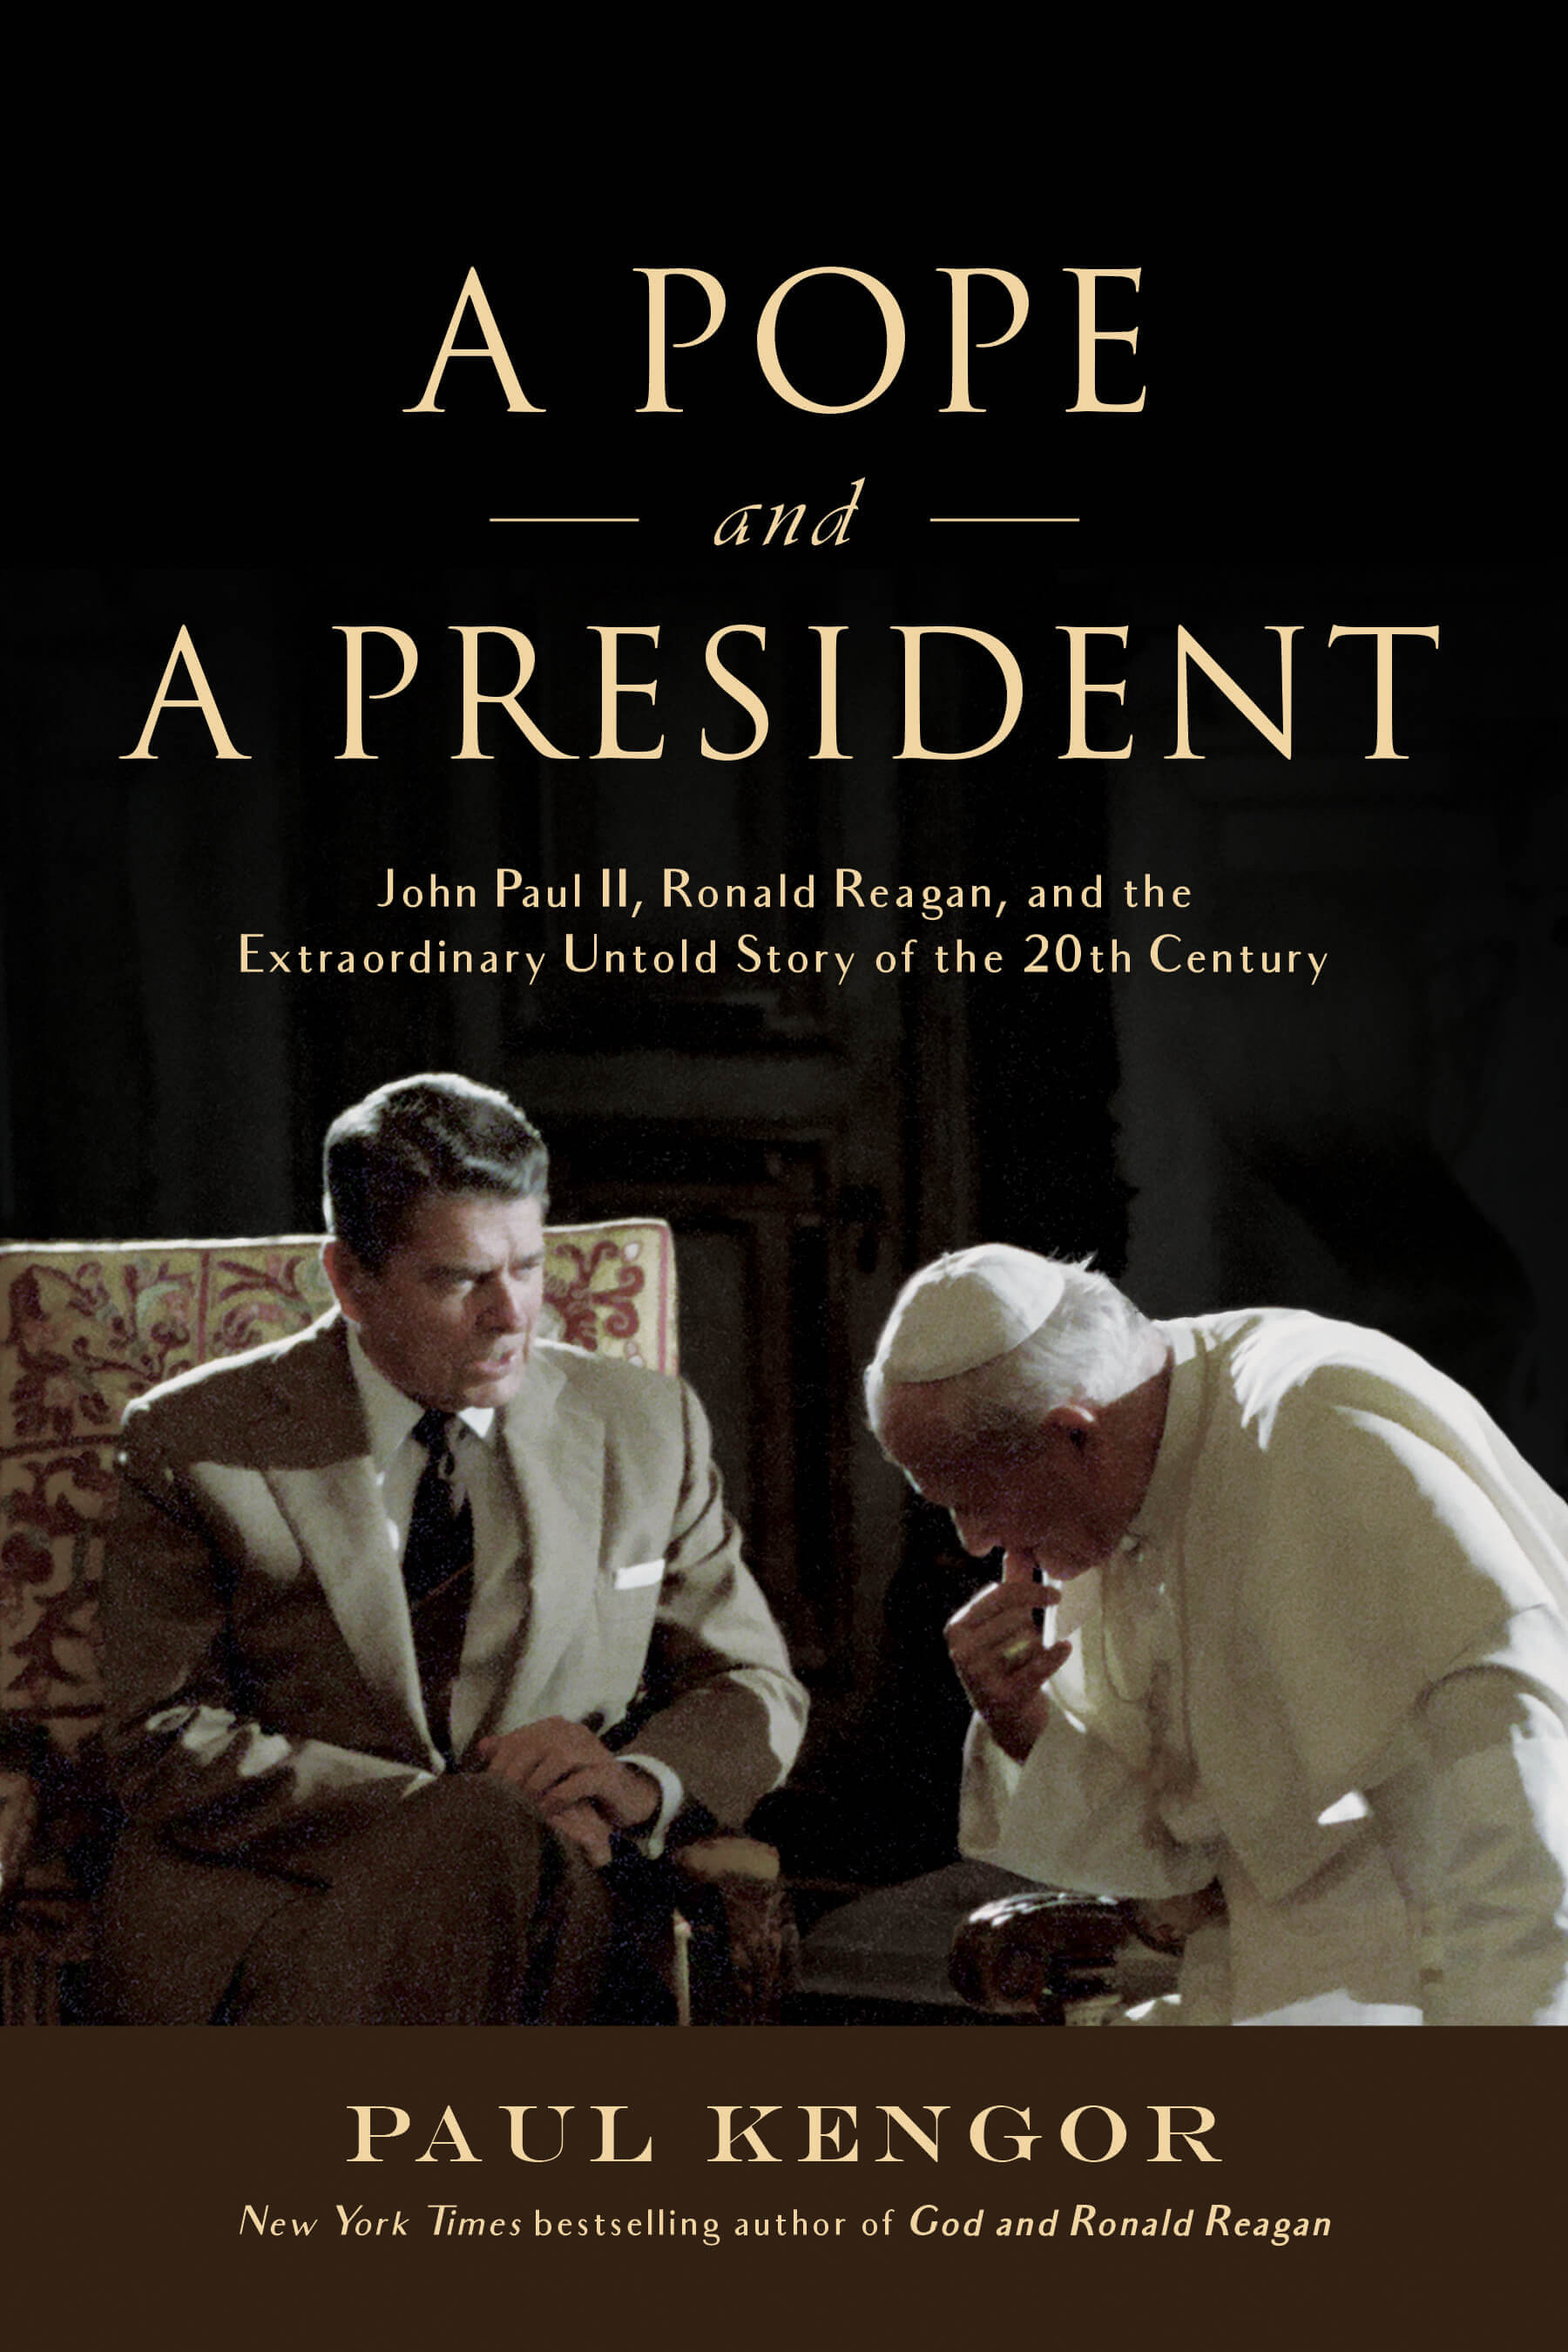 A Pope and a President